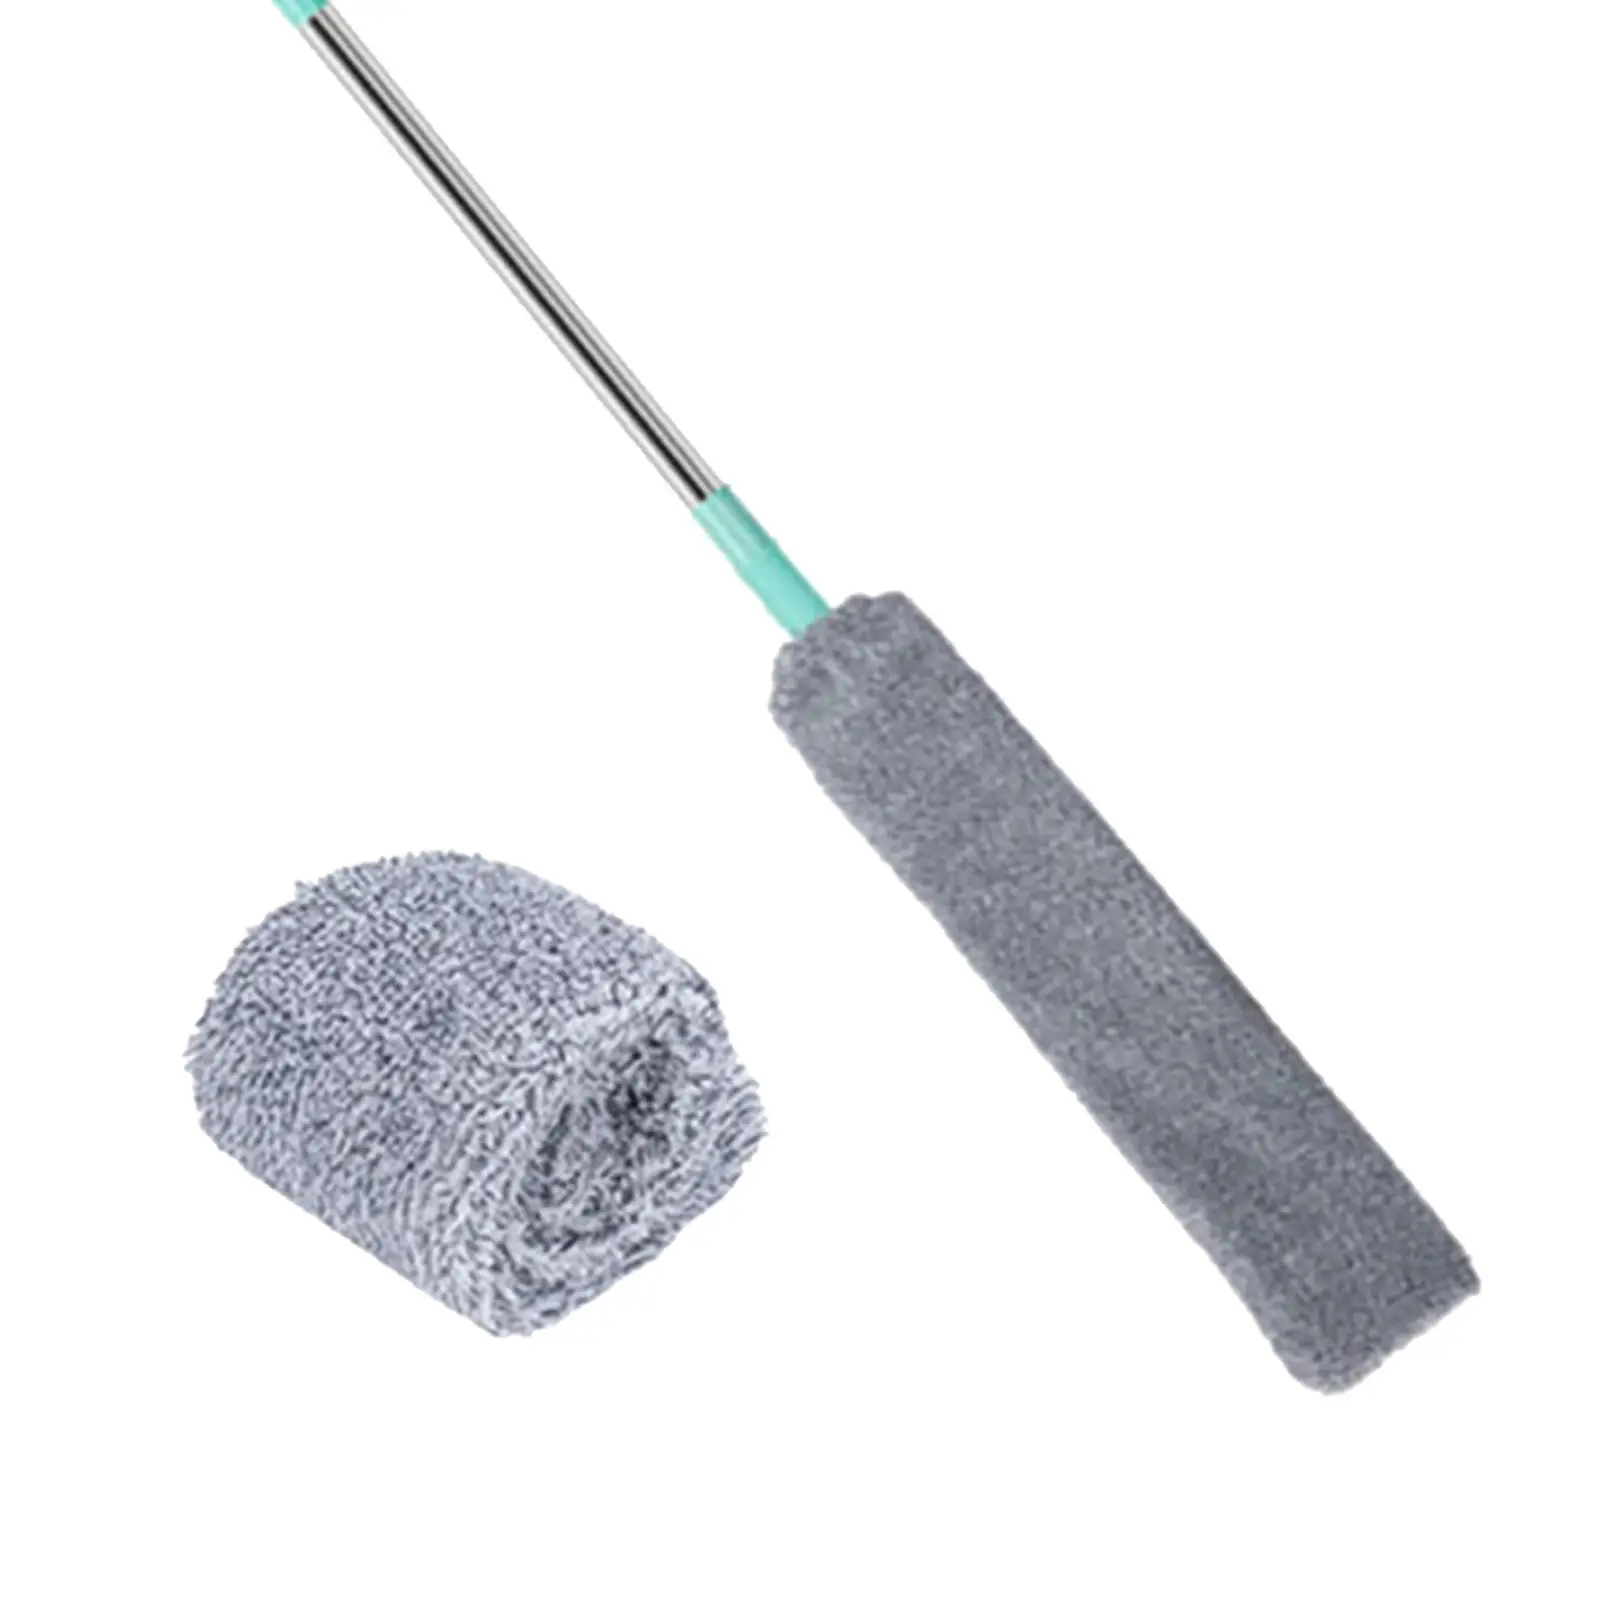 Gap Dust Cleaning Brush Microfiber Duster Detachable Cleaning Tool Durable